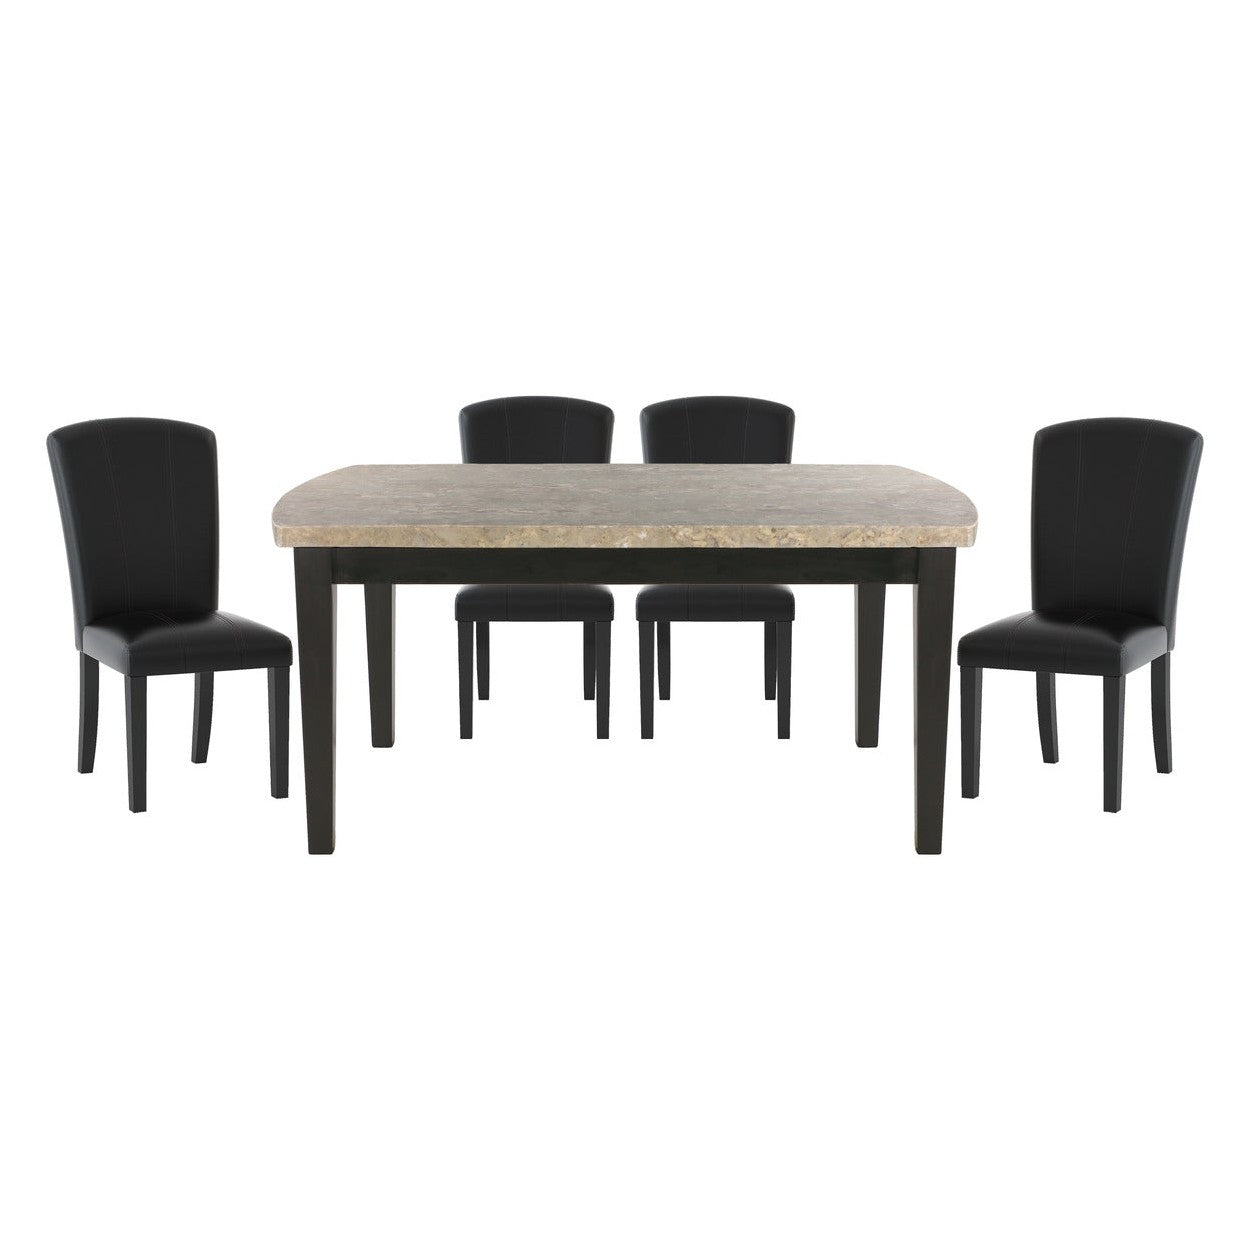 5pc set (TABLE + 4 SIDE CHAIRS) 5070-64*5